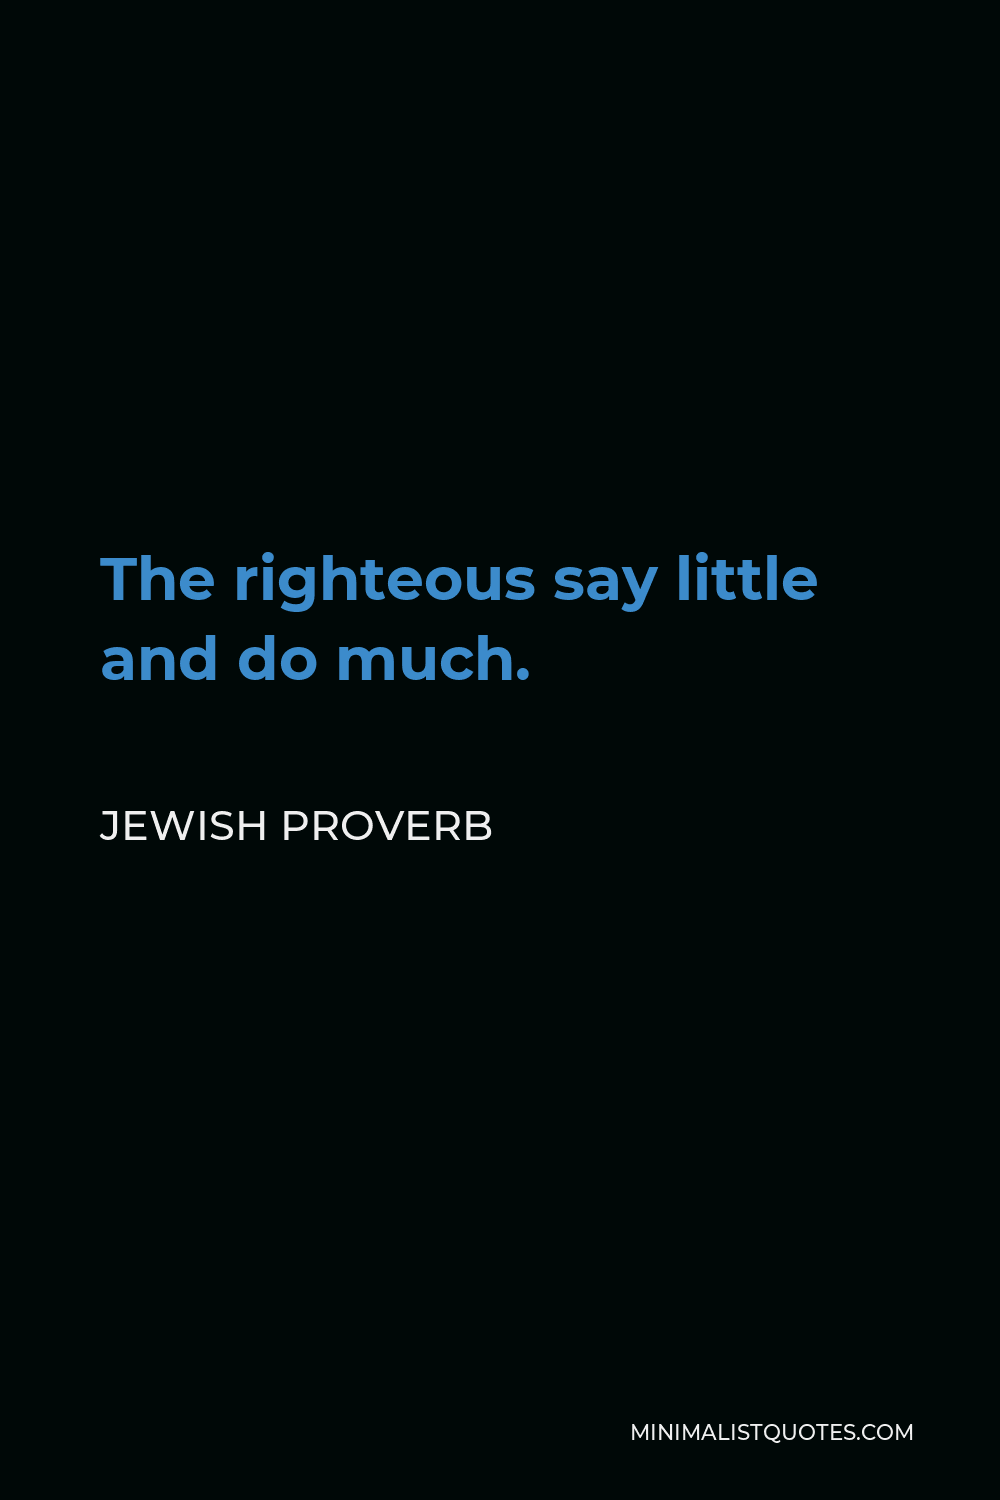 Jewish Proverb Quote - The righteous say little and do much.